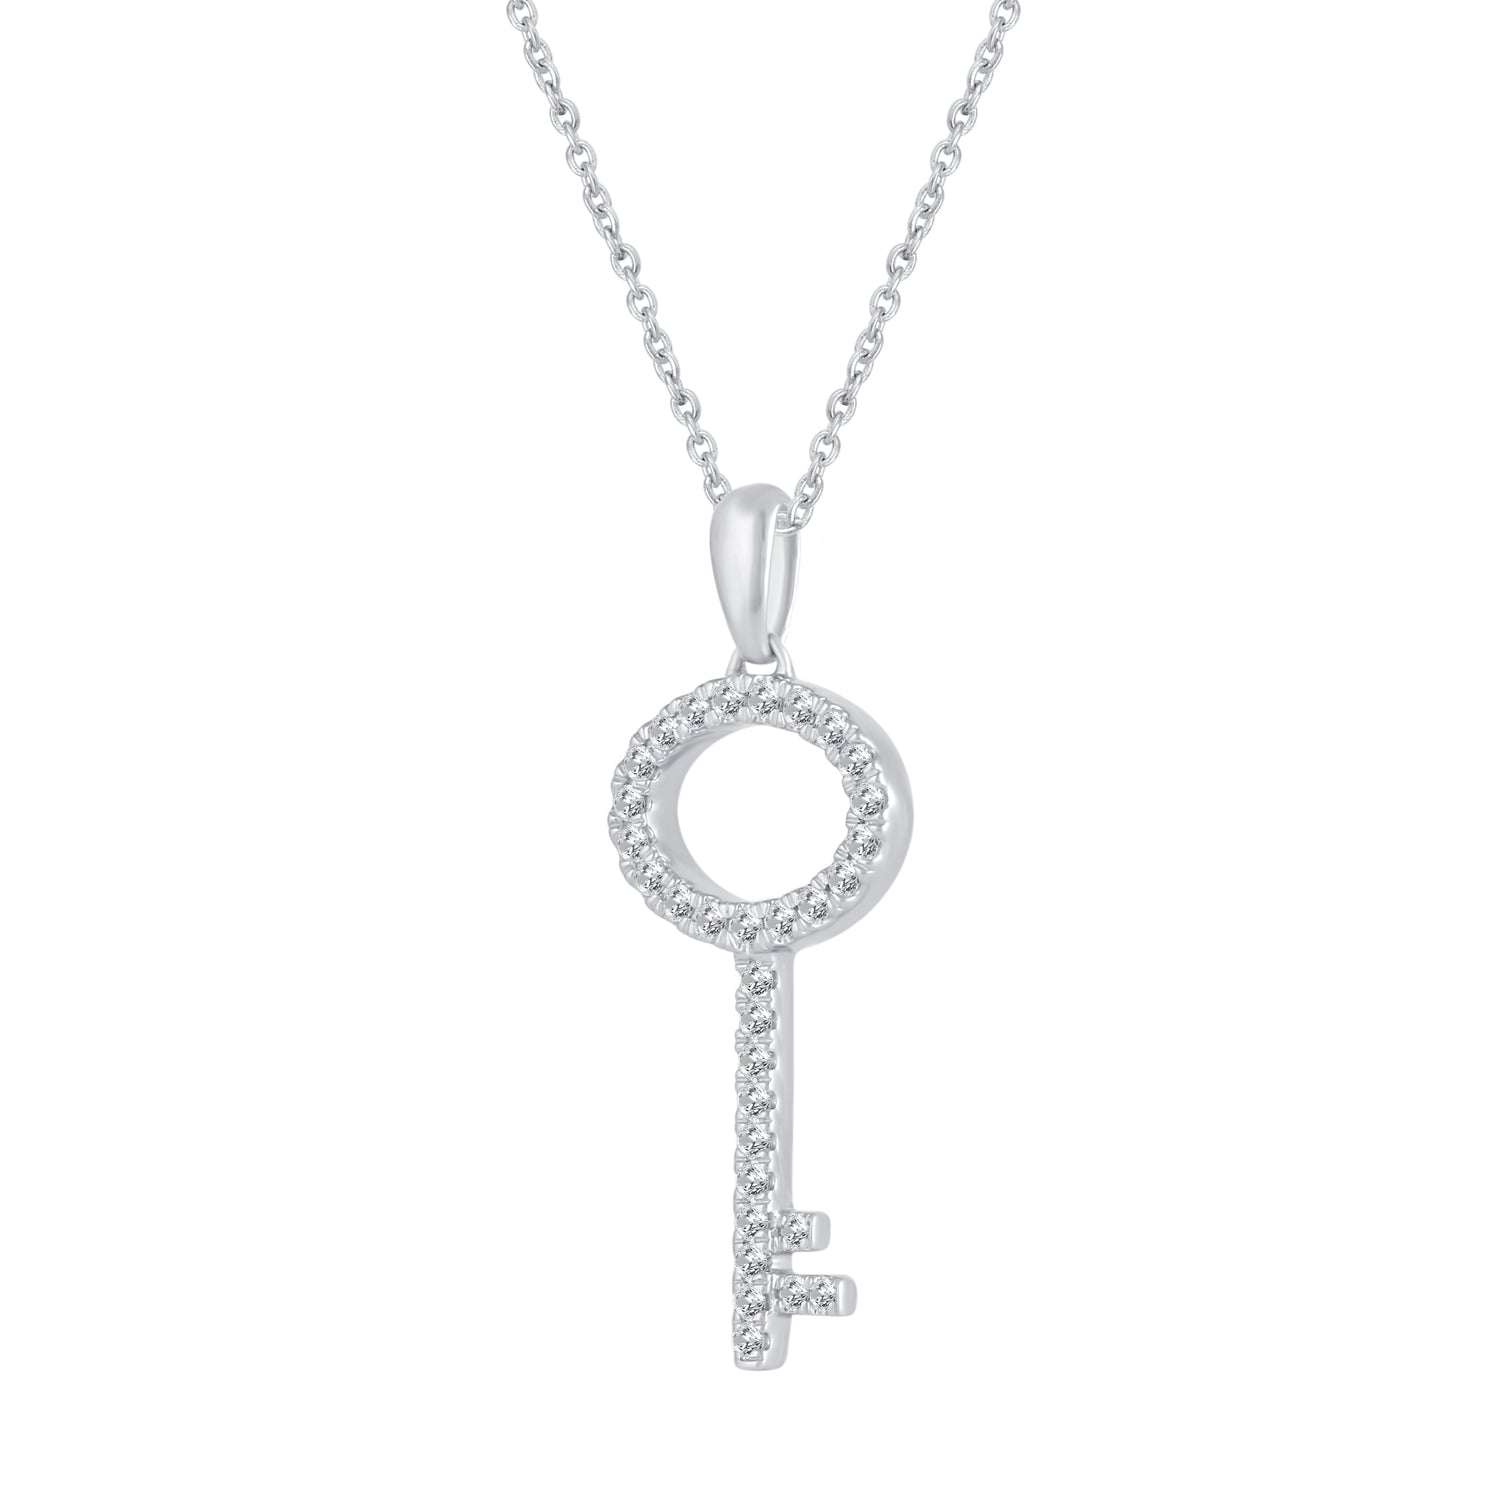 Key To Your Heart 1/4 Cttw Natural Diamond Pendant Necklace set in 925 Sterling Silver